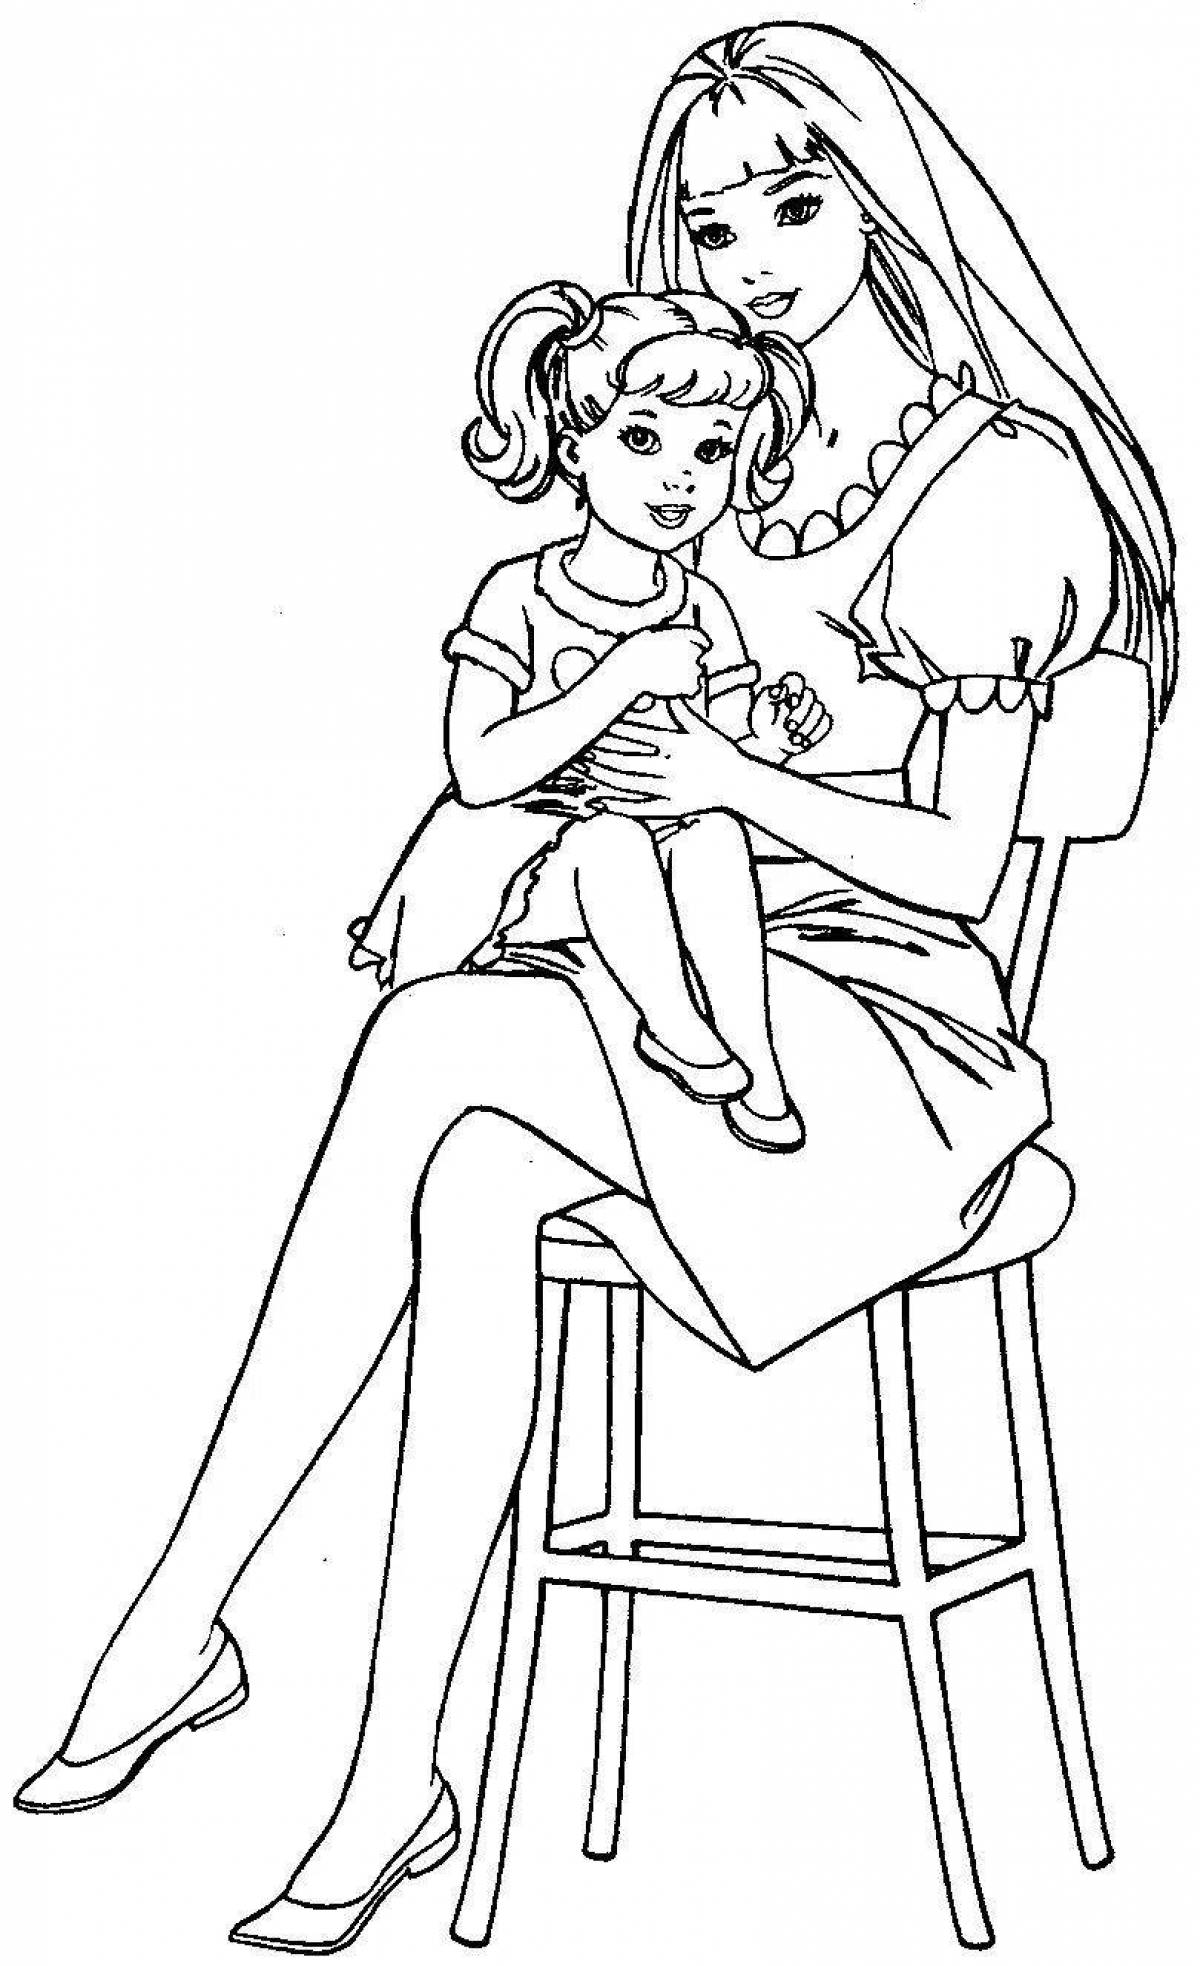 Coloring page joyful barbie and daughter